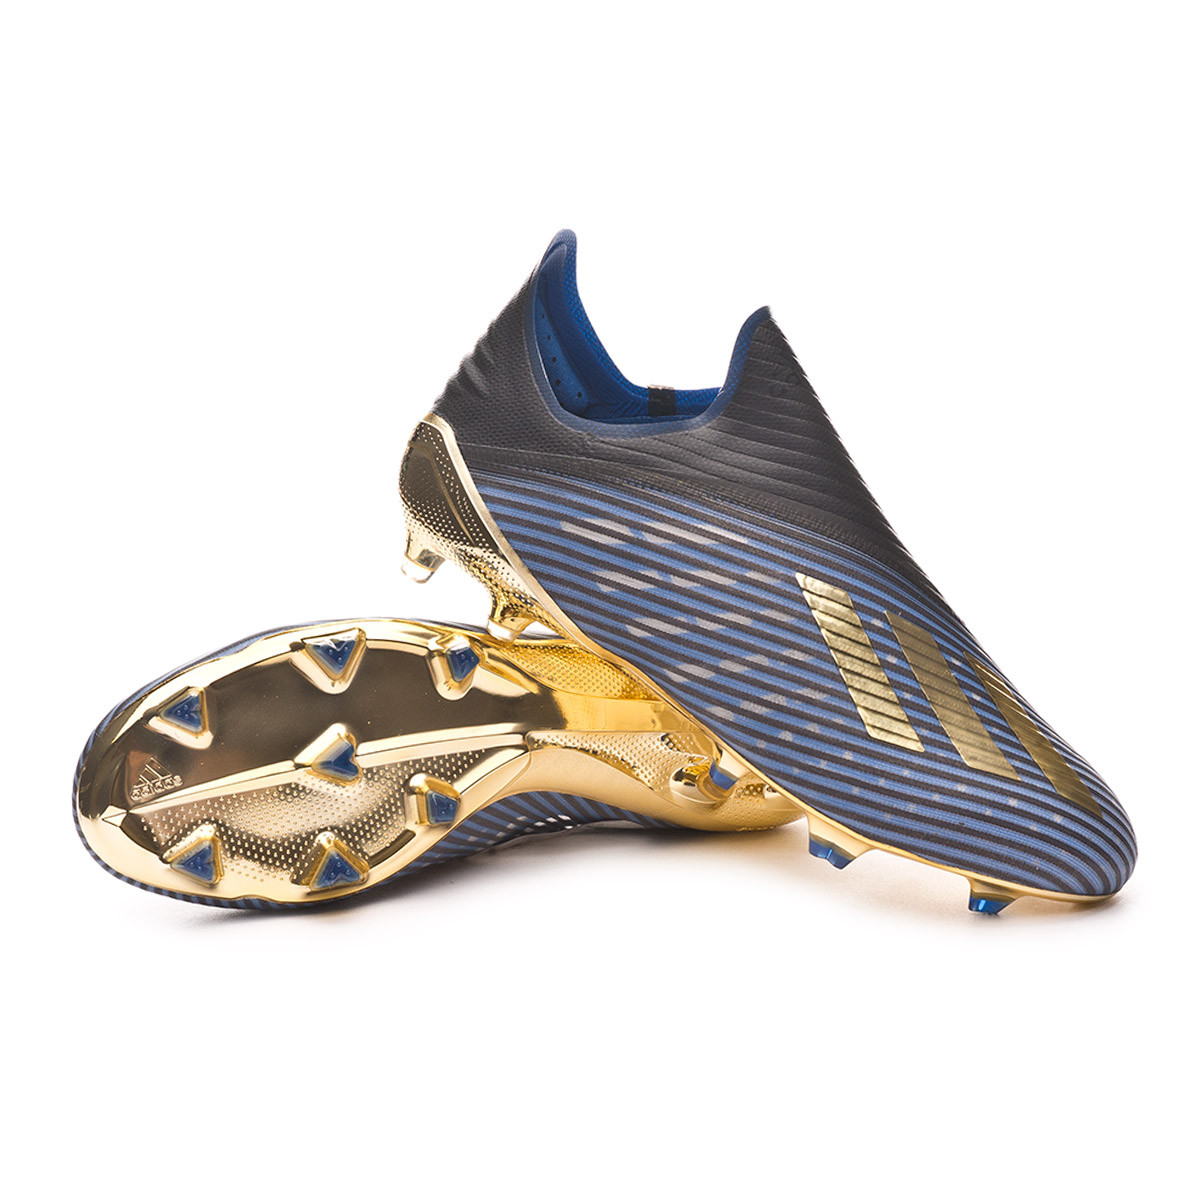 adidas football boots blue and gold